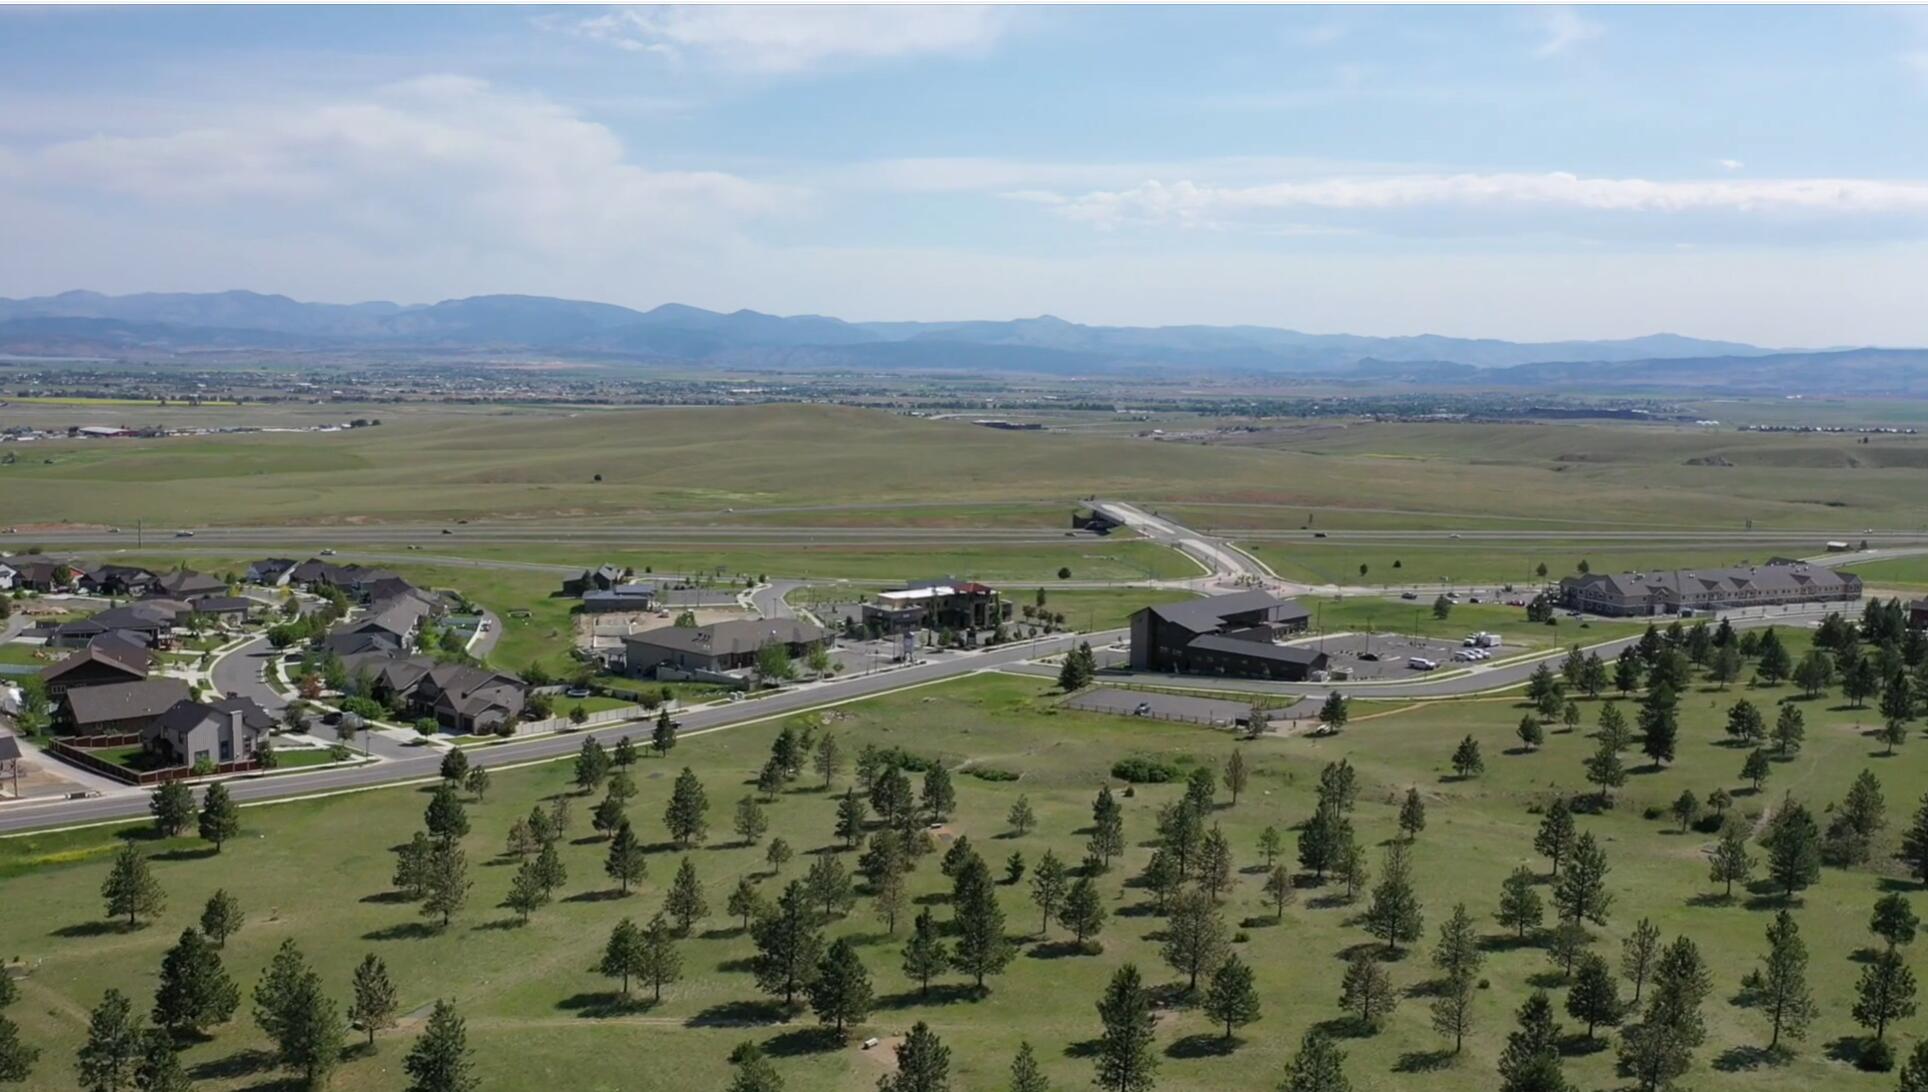 Remarks: Zoned B-2 commercial. Great opportunity for commercial development at highly visible South Helena I-15 interchange. Excellent views, city services, fiber optic network, convenient access, city parks and trails.